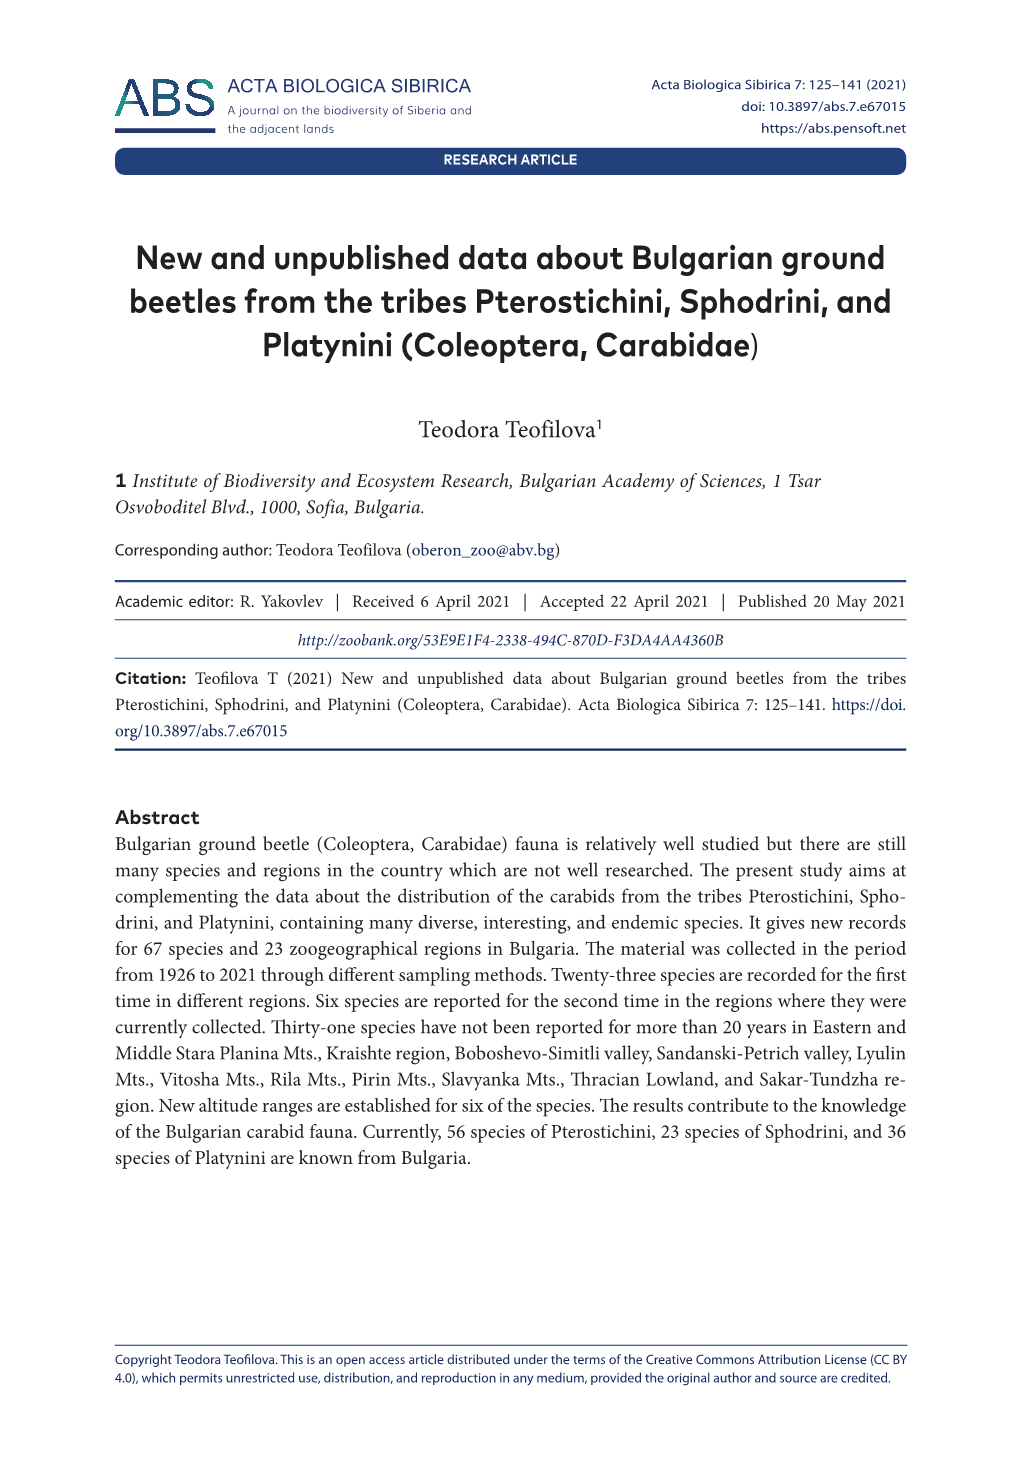 New and Unpublished Data About Bulgarian Ground Beetles from the Tribes Pterostichini, Sphodrini, and Platynini (Coleoptera, Carabidae)